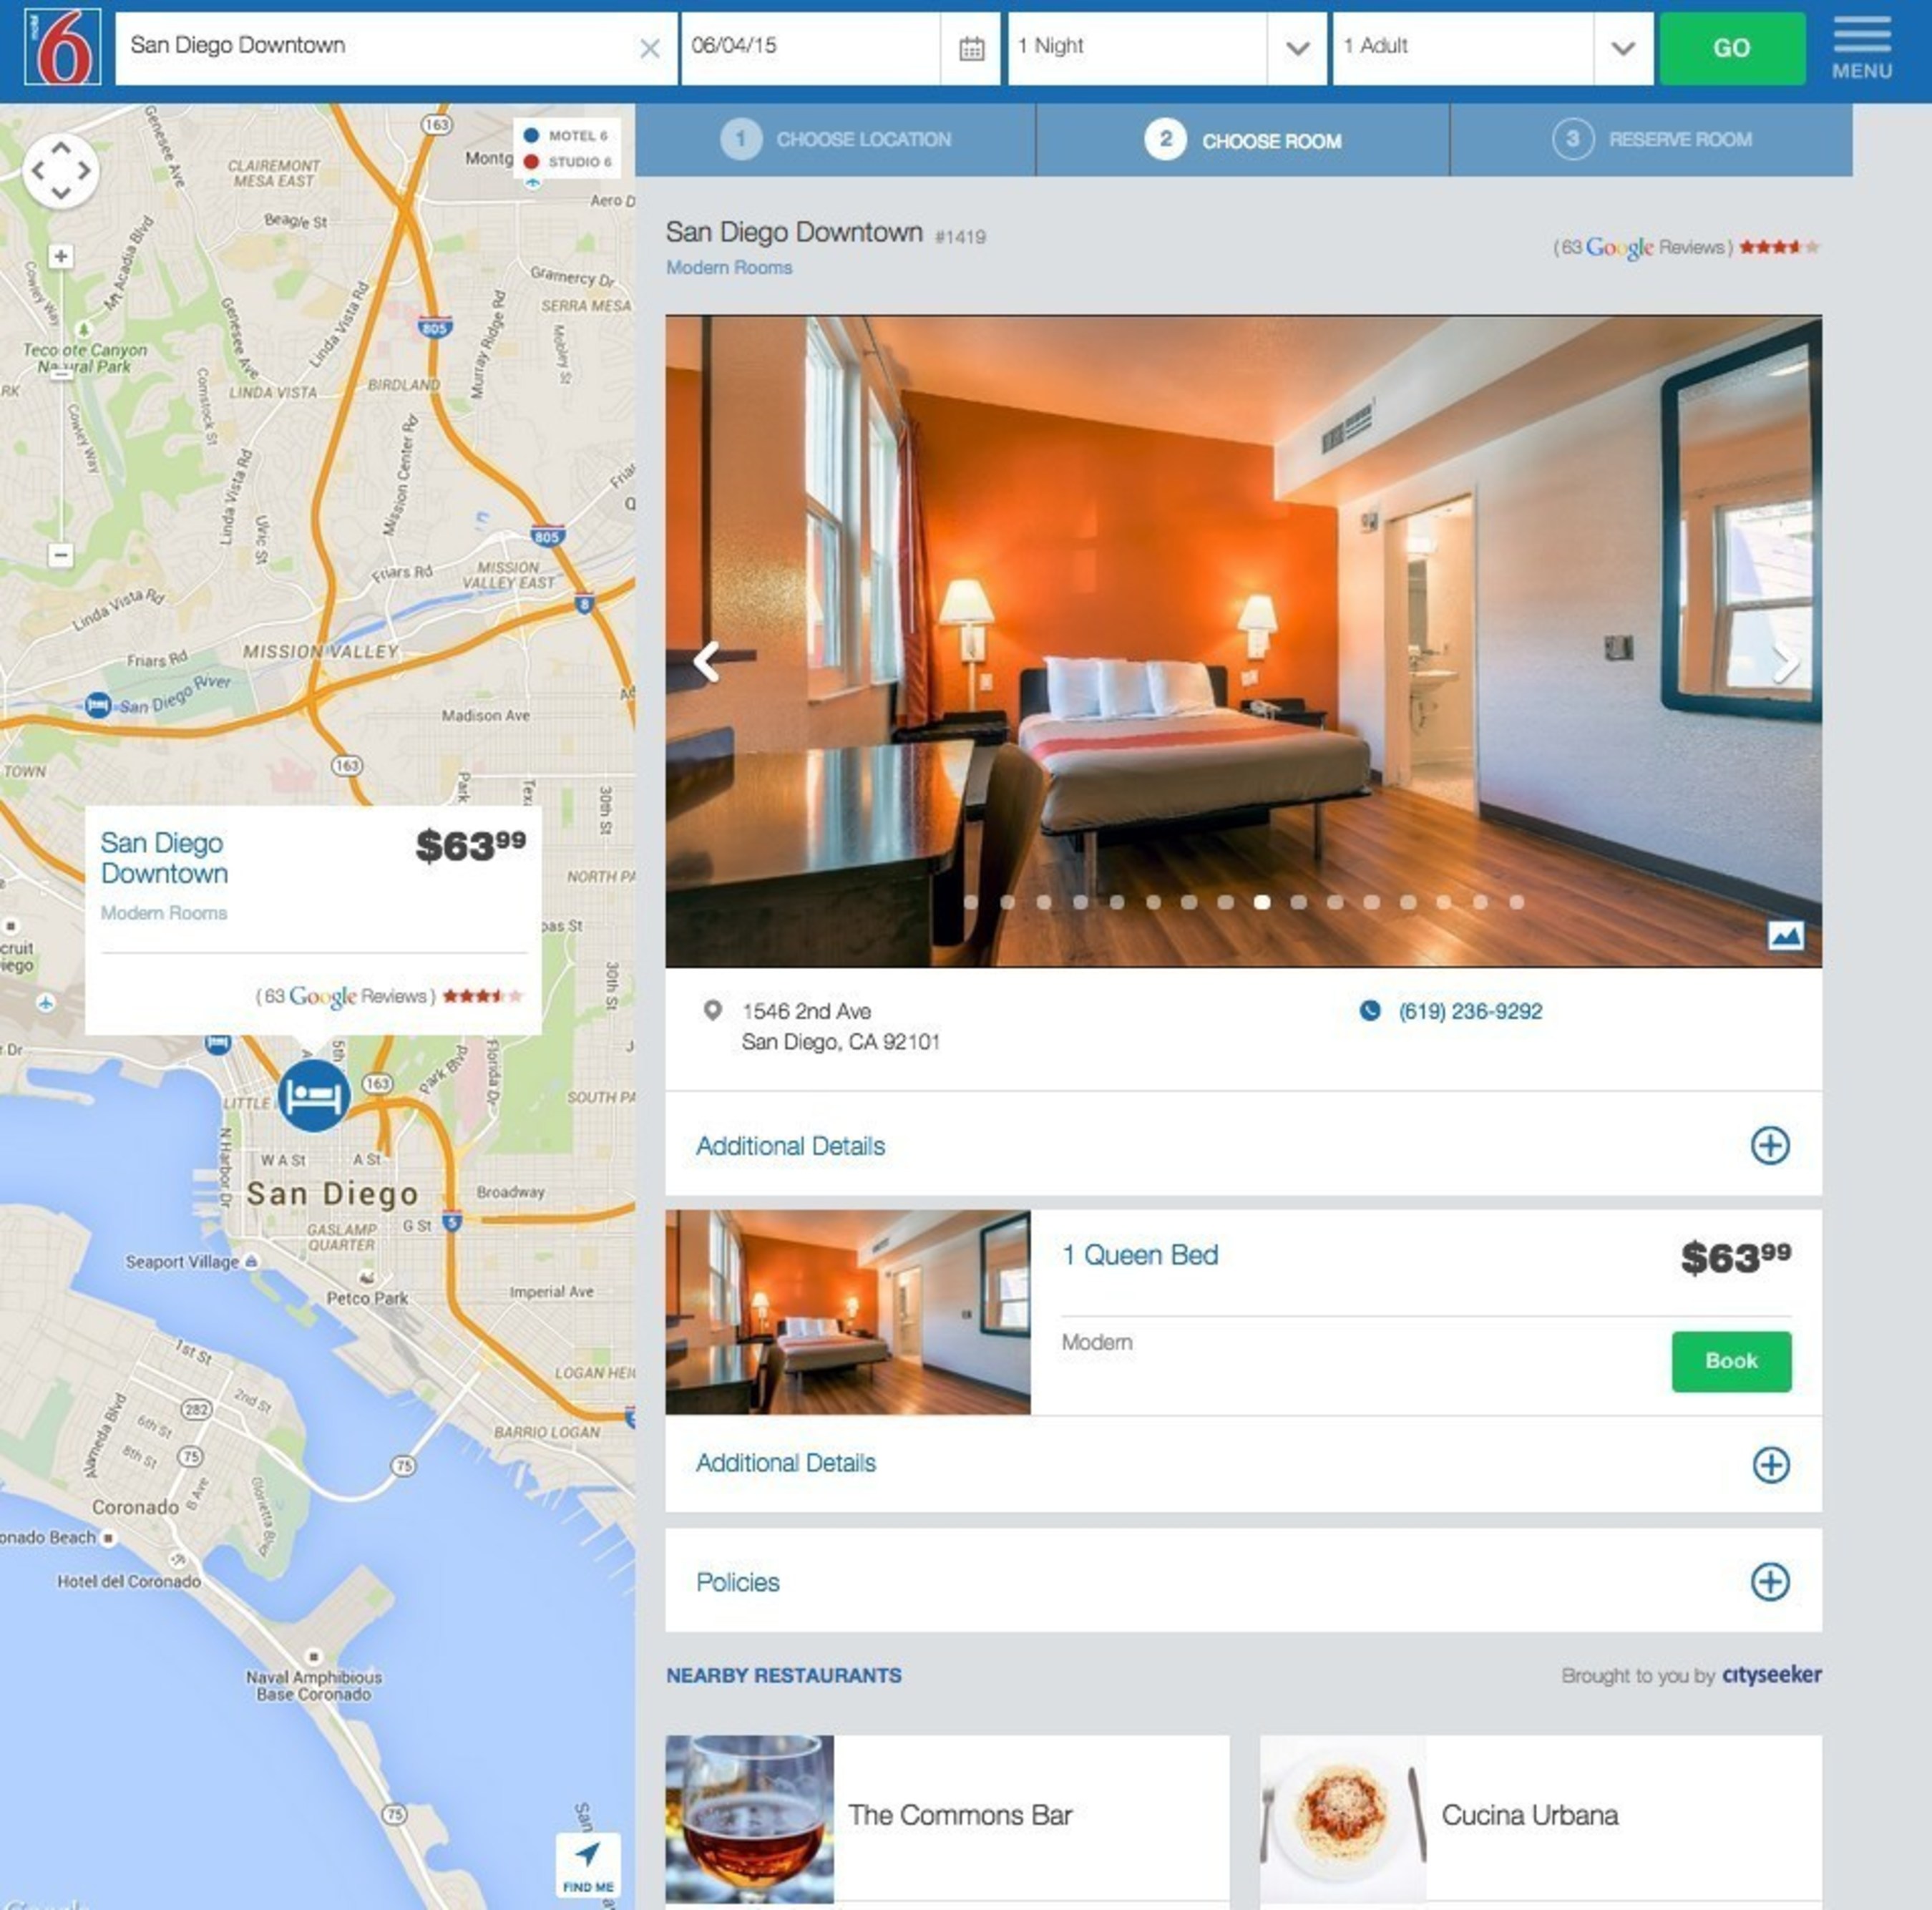 The new motel6.com features new high-resolution photography for over 500 properties.